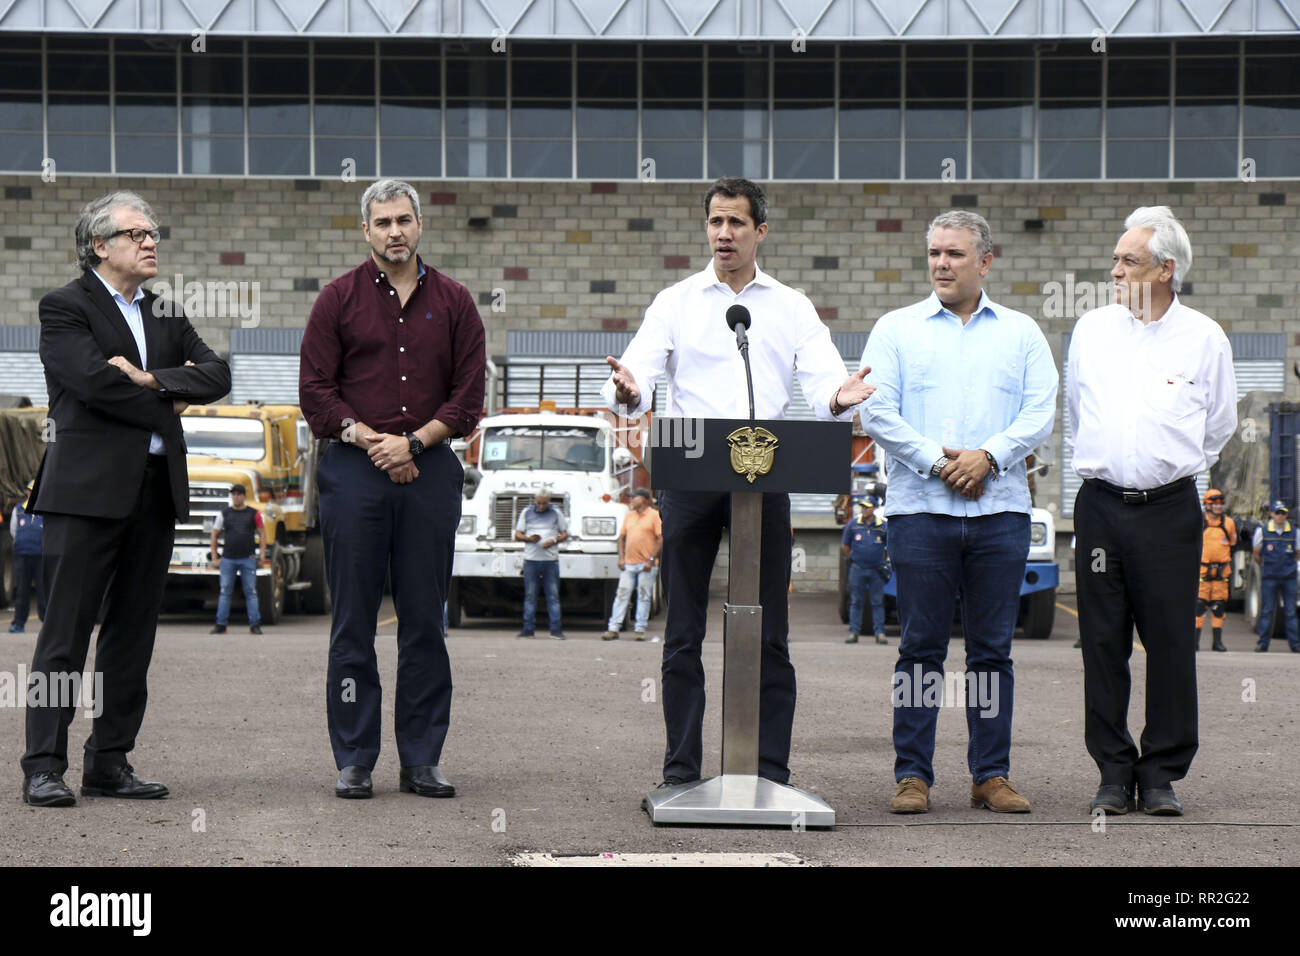 Caracas, Venezuela. 23rd Feb, 2019. Venezuelan opposition leader Juan Guaido (C), flanked by presidents Mario Abdo Benitez (2nd-L) of Paraguay, Ivan Duque (2nd-R) of Colombia and Sebastian Pinera (R) of Chile, and Organization of American States Secretary-General Luis Almagro (L), speaks in an official ceremony in Cucuta on the Colombian side of the Tienditas International Bridge before the attempt to cross humanitarian aid over the border into Venezuela, on February 23, 2019. US-donated humanitarian aid was ''on its way'' to Venezuela, opposition leader Juan Gauido announced Saturday as Stock Photo